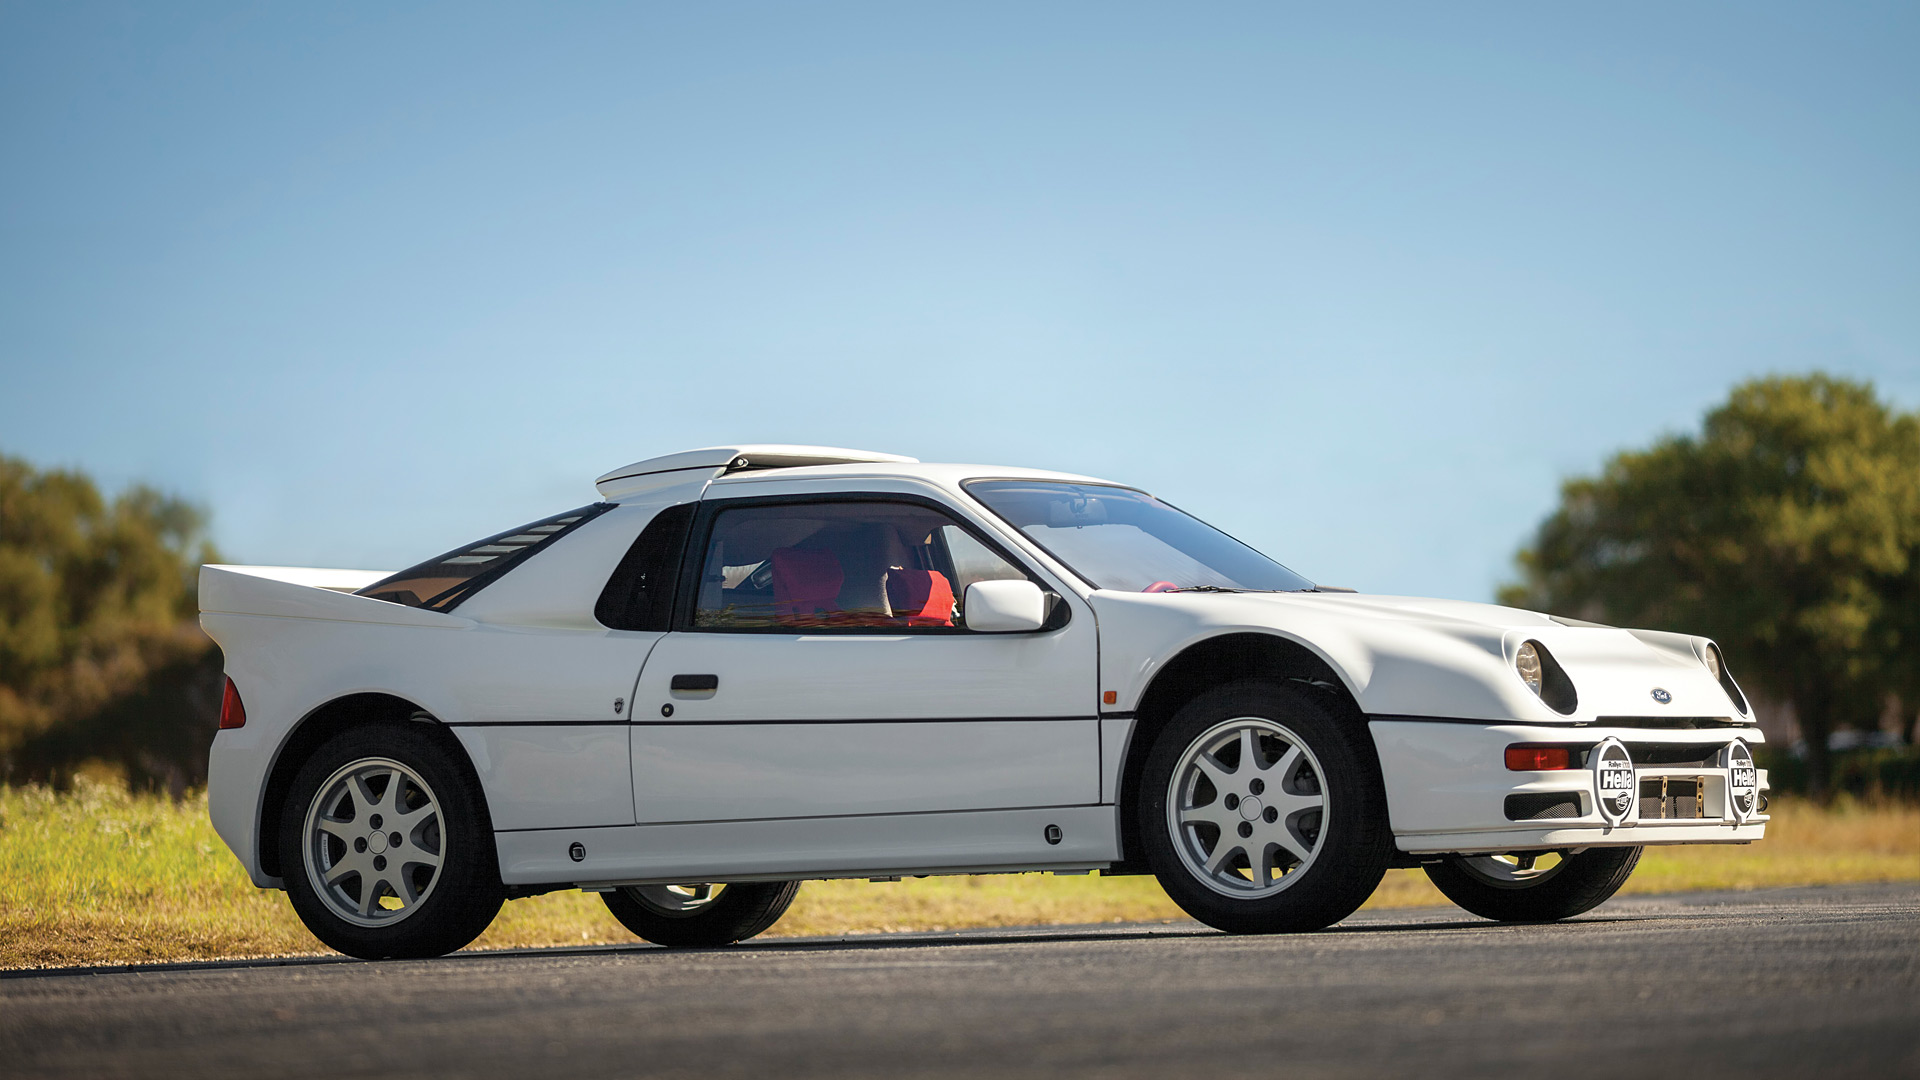 Ford Rs200 Wallpaper HD Image Wsupercars